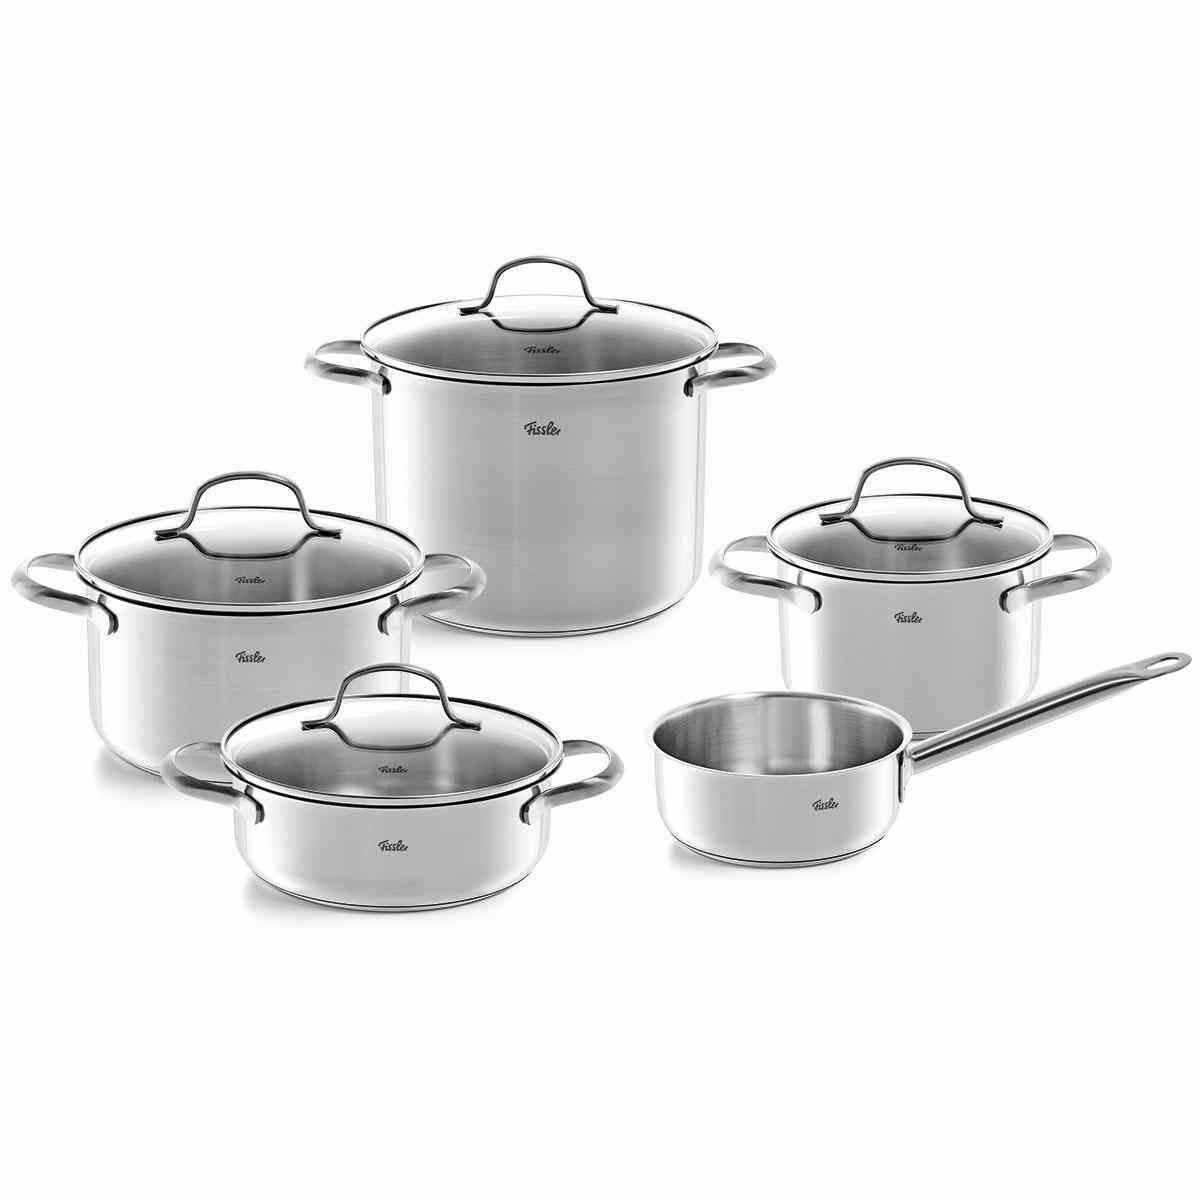 Experienced person marriage Monkey Set oale din inox 3 piese Fissler San Francisco - 11 produse